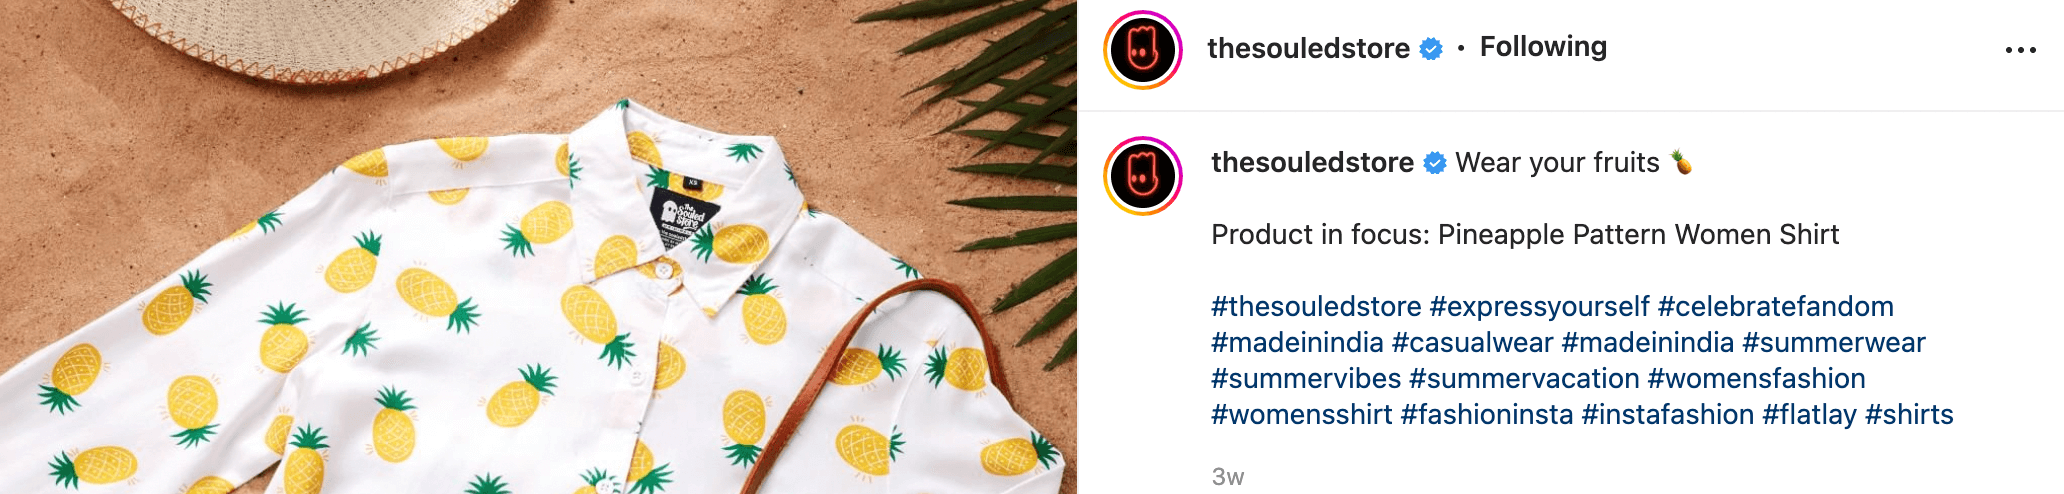 instagram hashtags for more sales